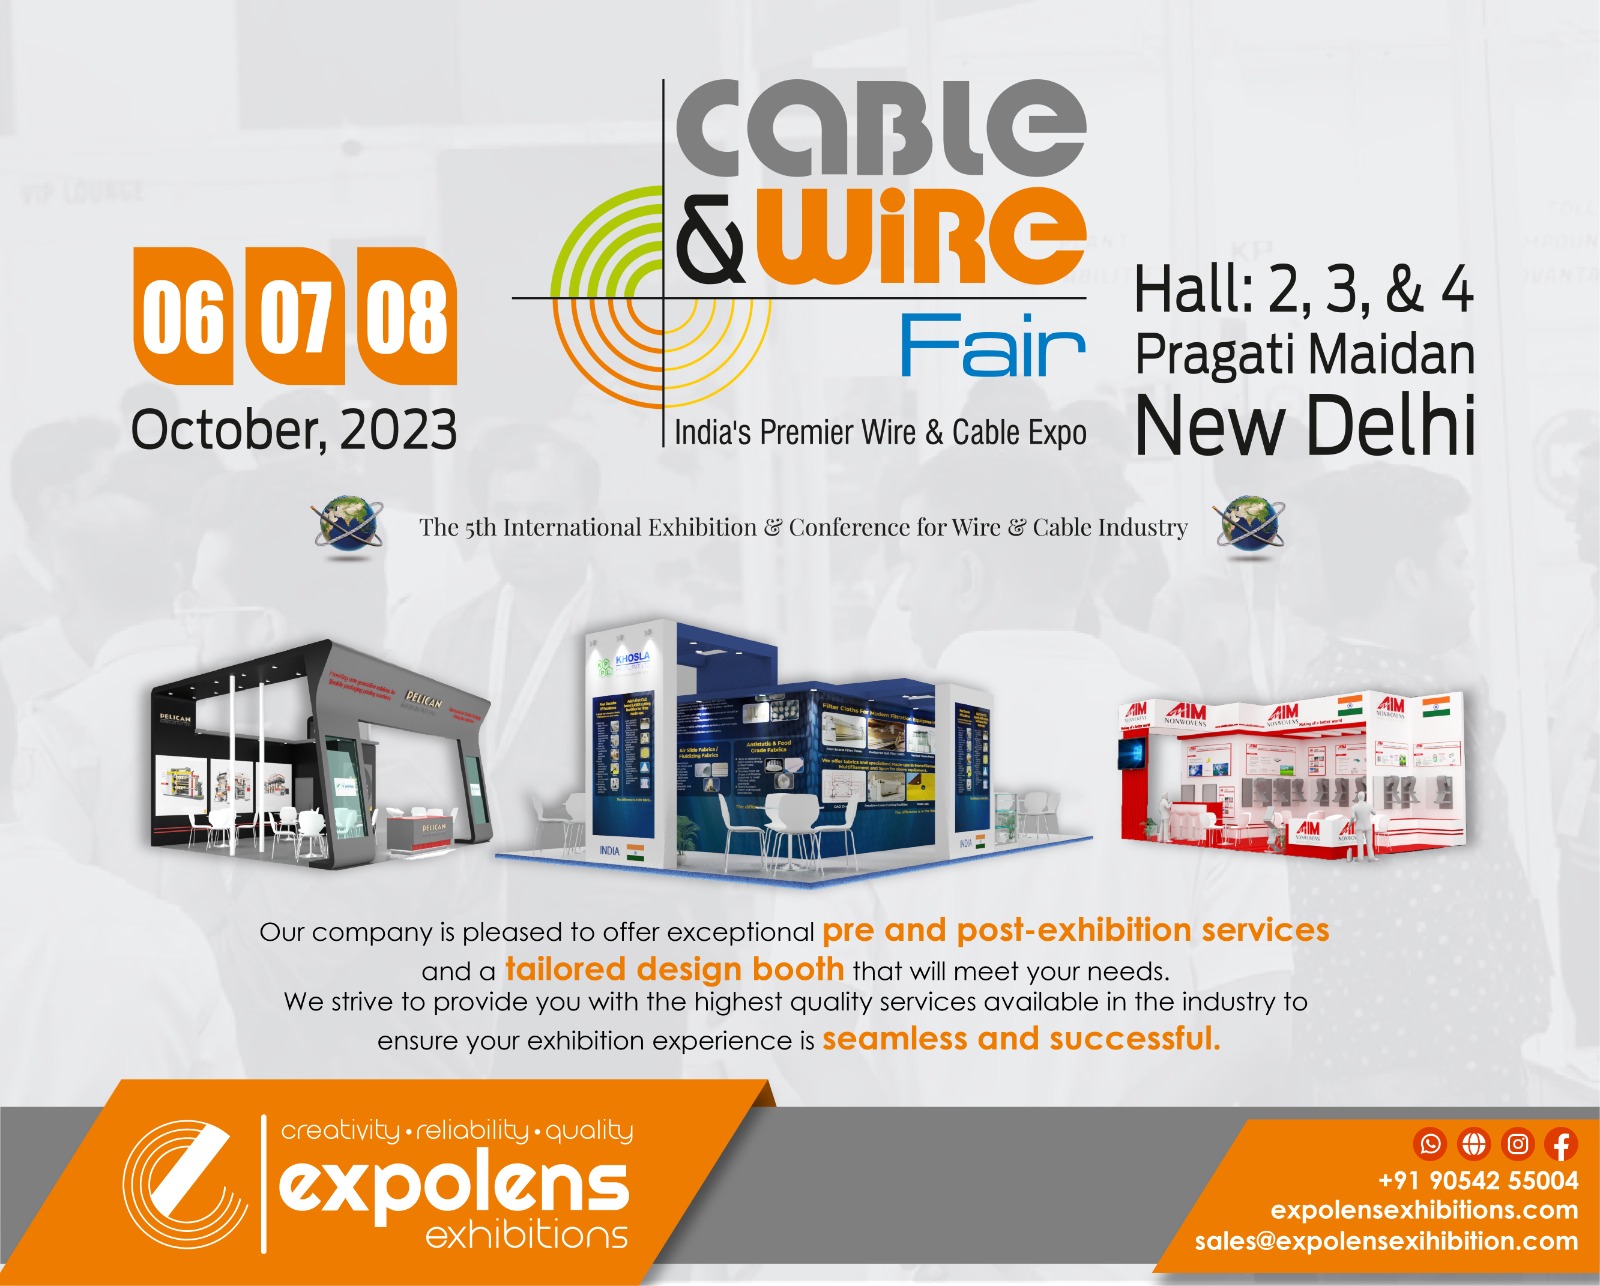 CABLE & WIRE FAIR 2023 : Expolens Exhibitions & Events